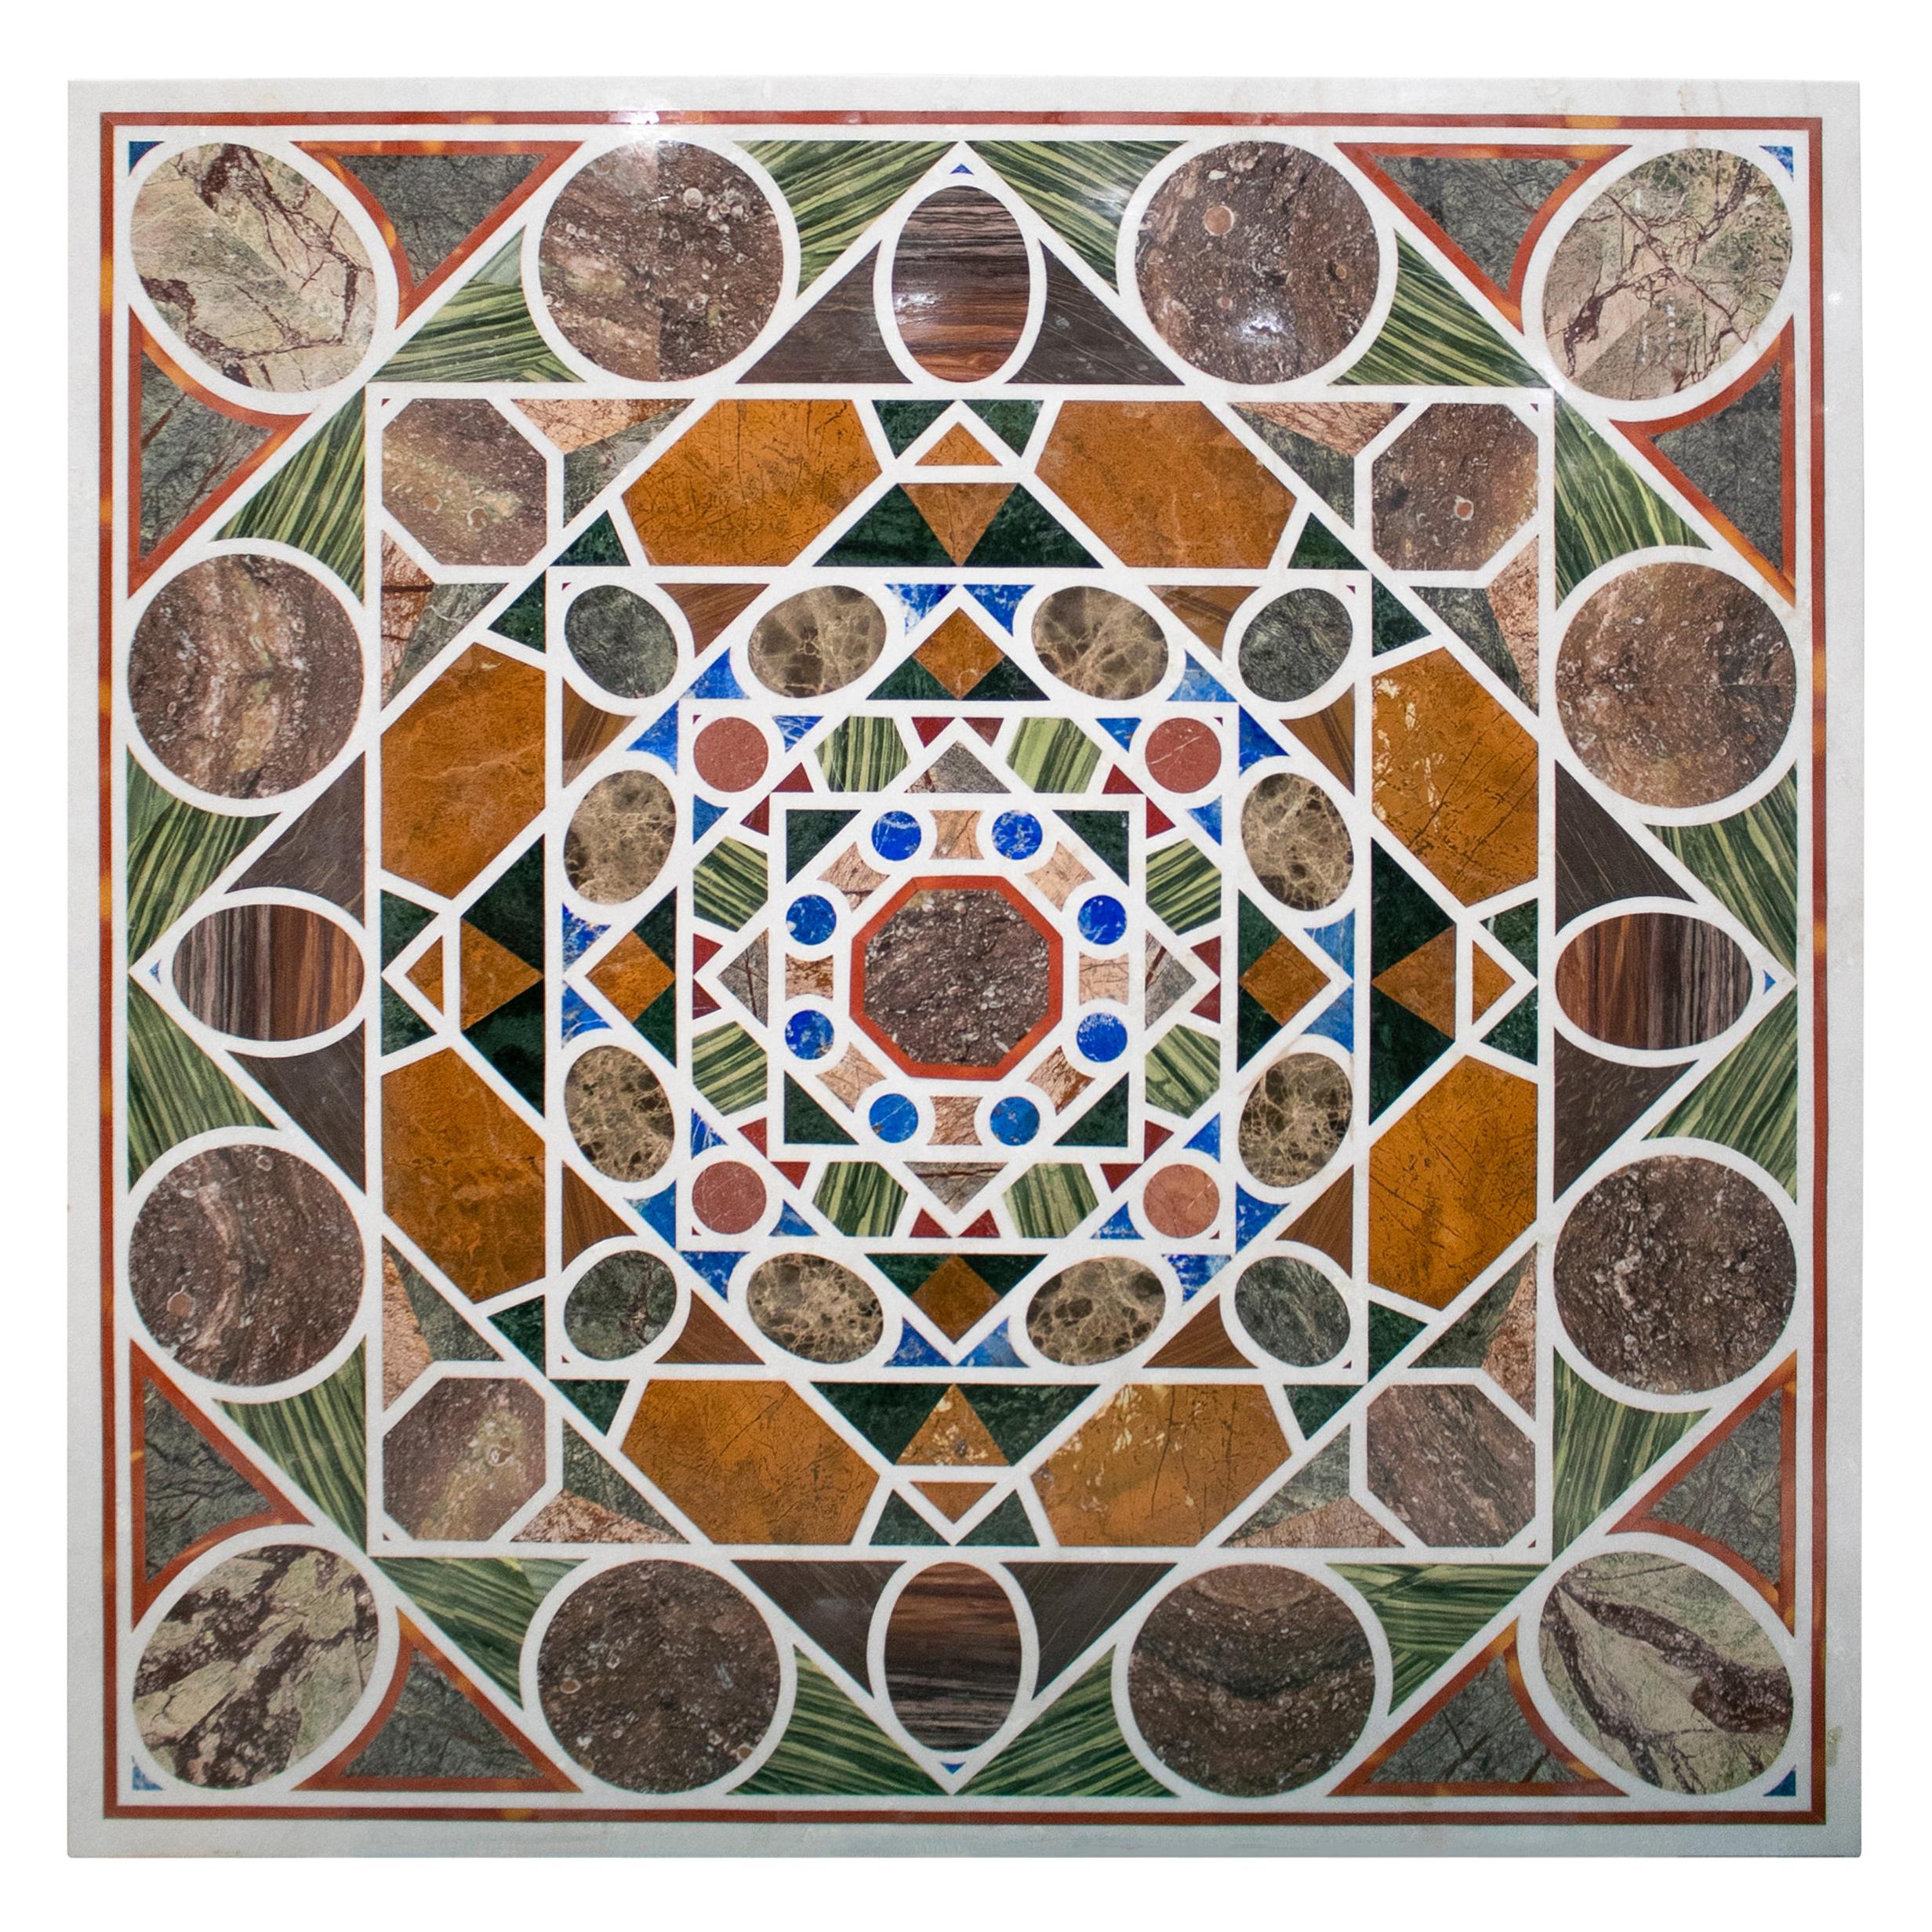 Square Pietre Dure White Marble and Lapis Geometric Mosaic Table Top For Sale